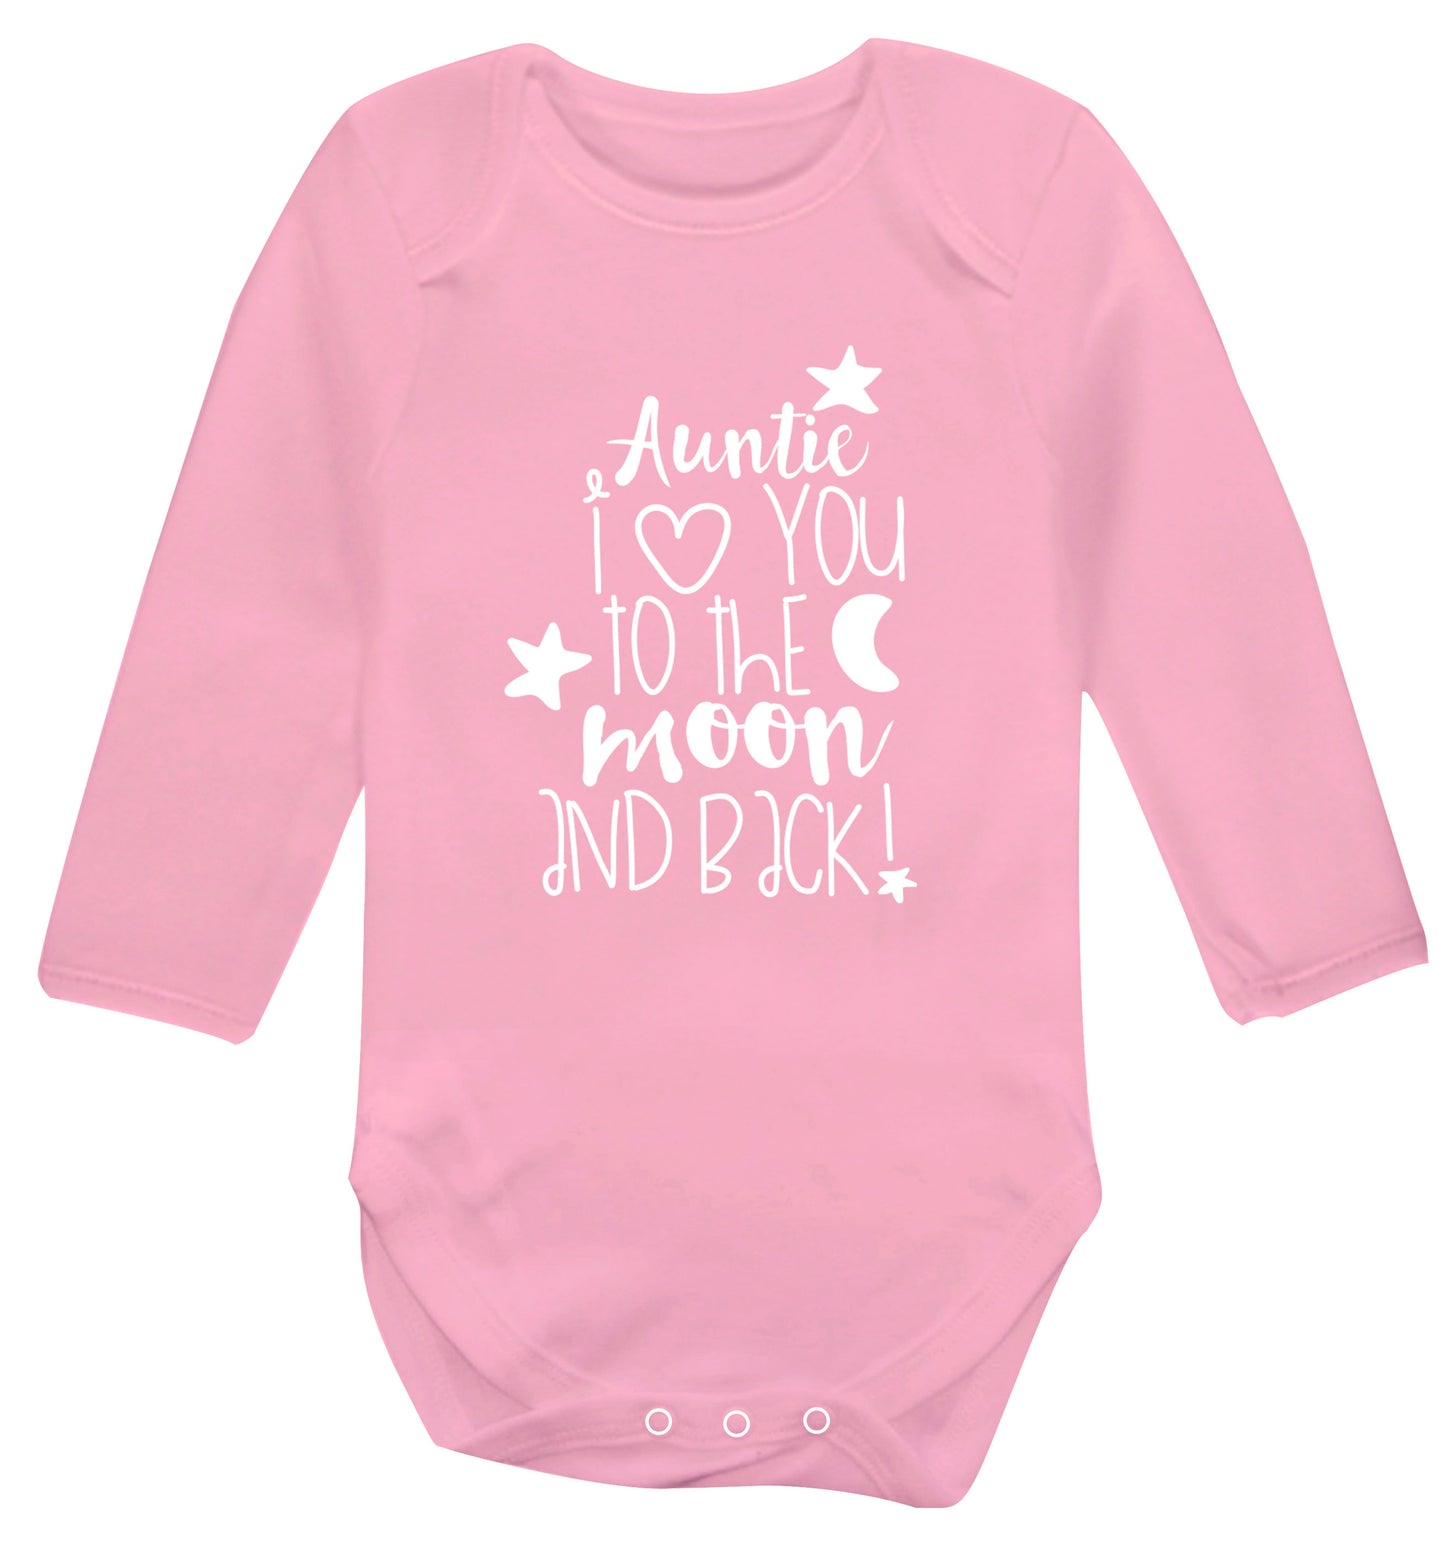 Auntie I love you to the moon and back Baby Vest long sleeved pale pink 6-12 months